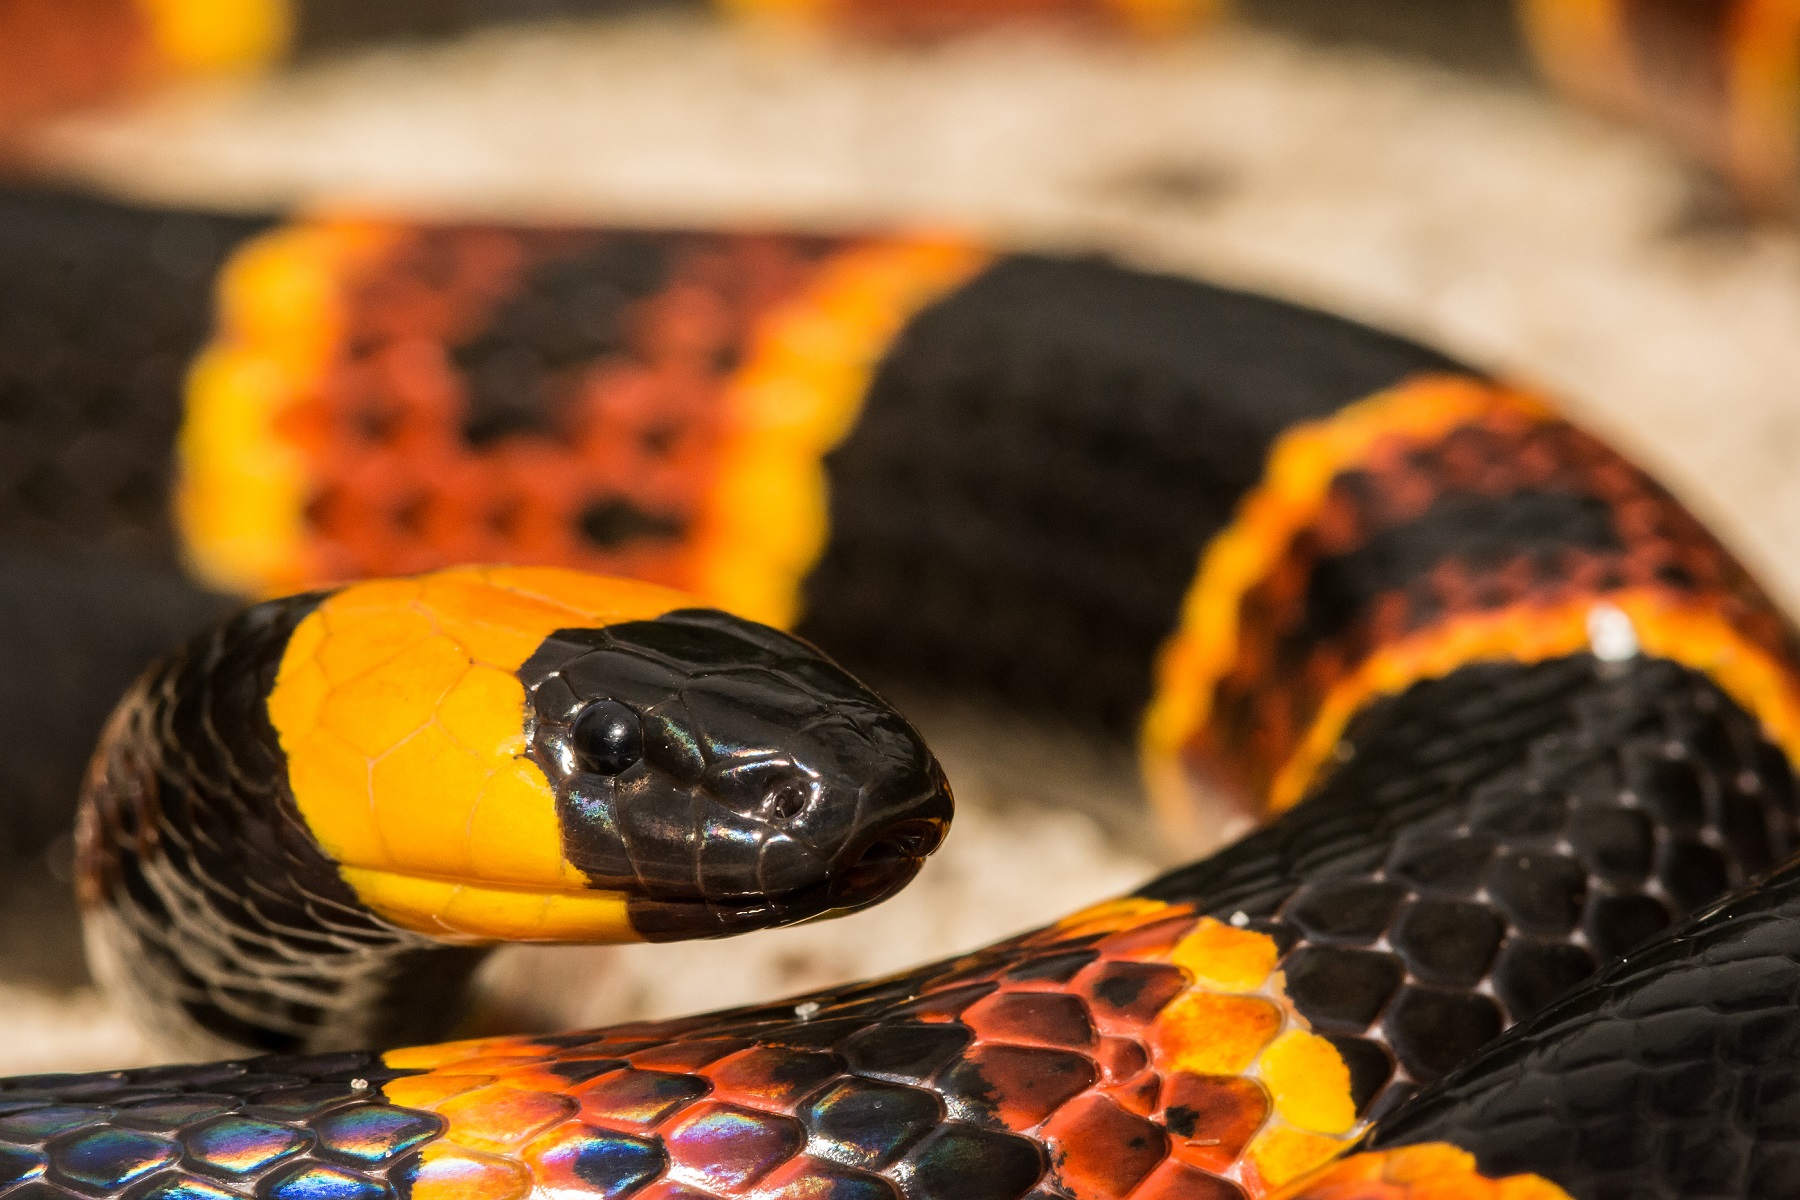 Coral Snake in Florida Everglades Holiday Park